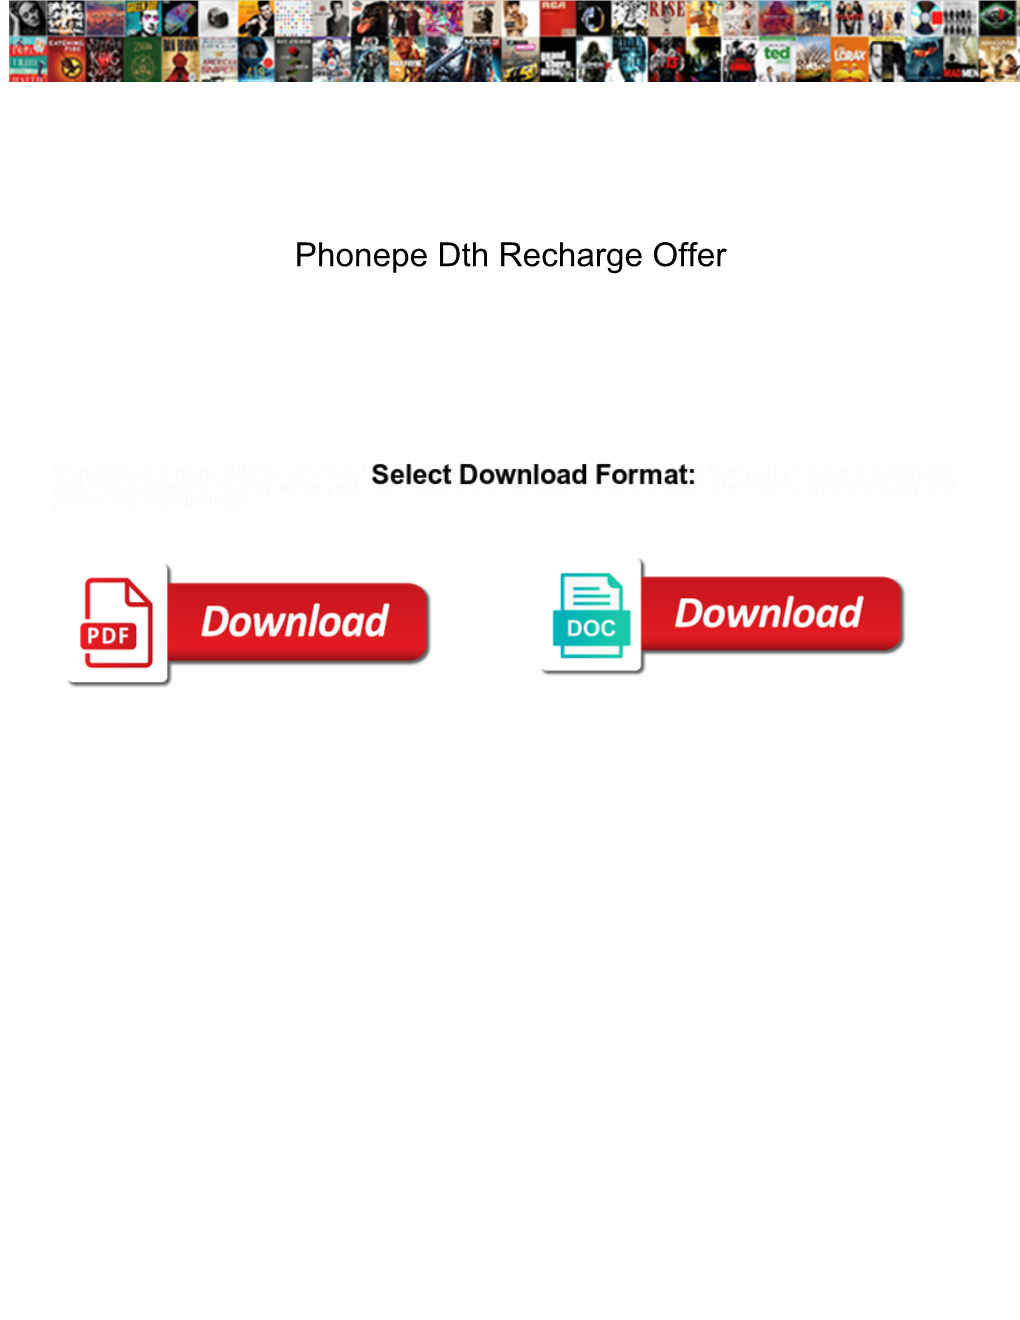 Phonepe Dth Recharge Offer